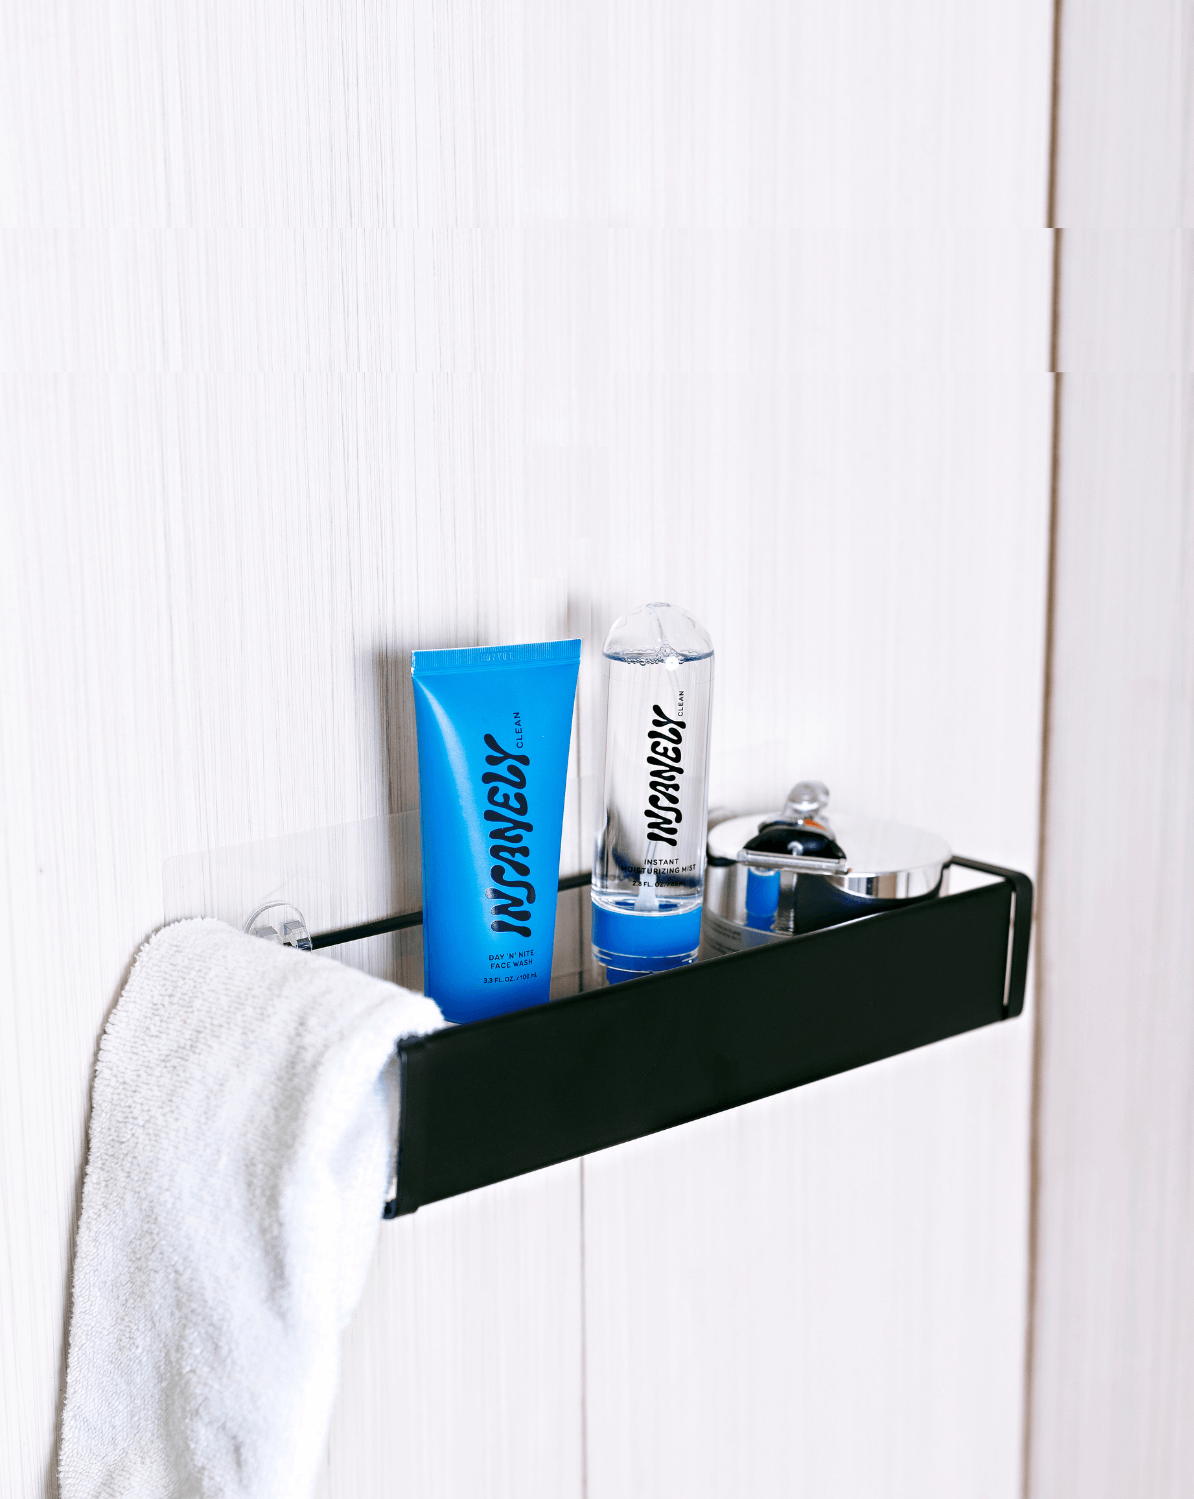 Men's skincare set placed in the bathroom for men to easily use best men’s hydrating face mist for oily skin during their shower experience.